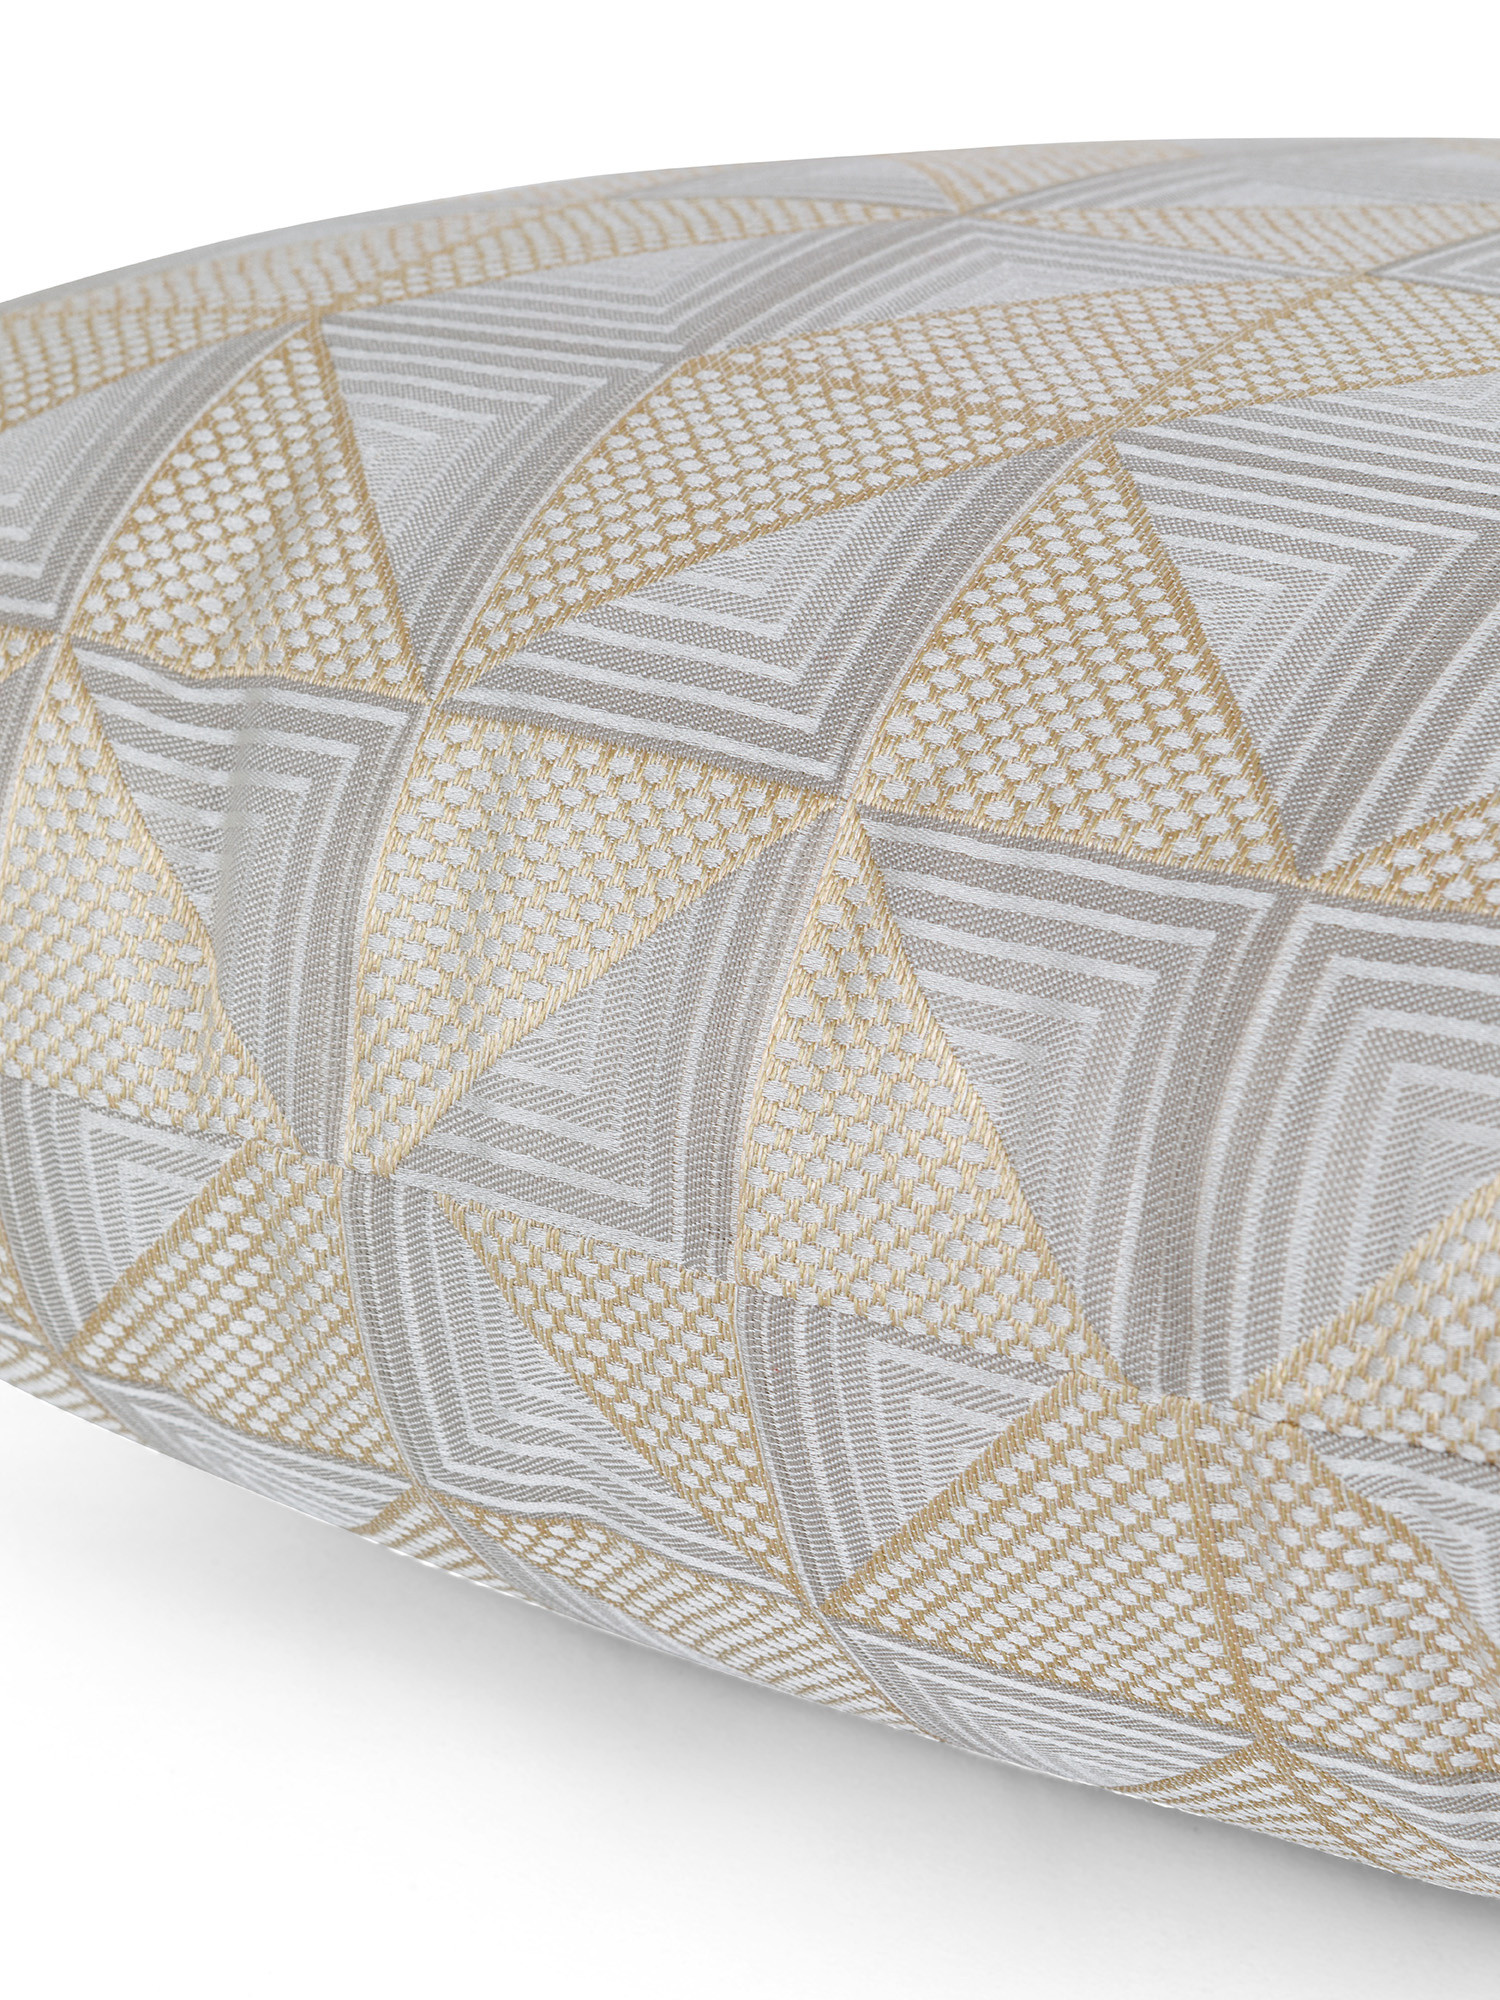 Cushion in jacquard fabric with geometric pattern 45x45 cm, Silver Grey, large